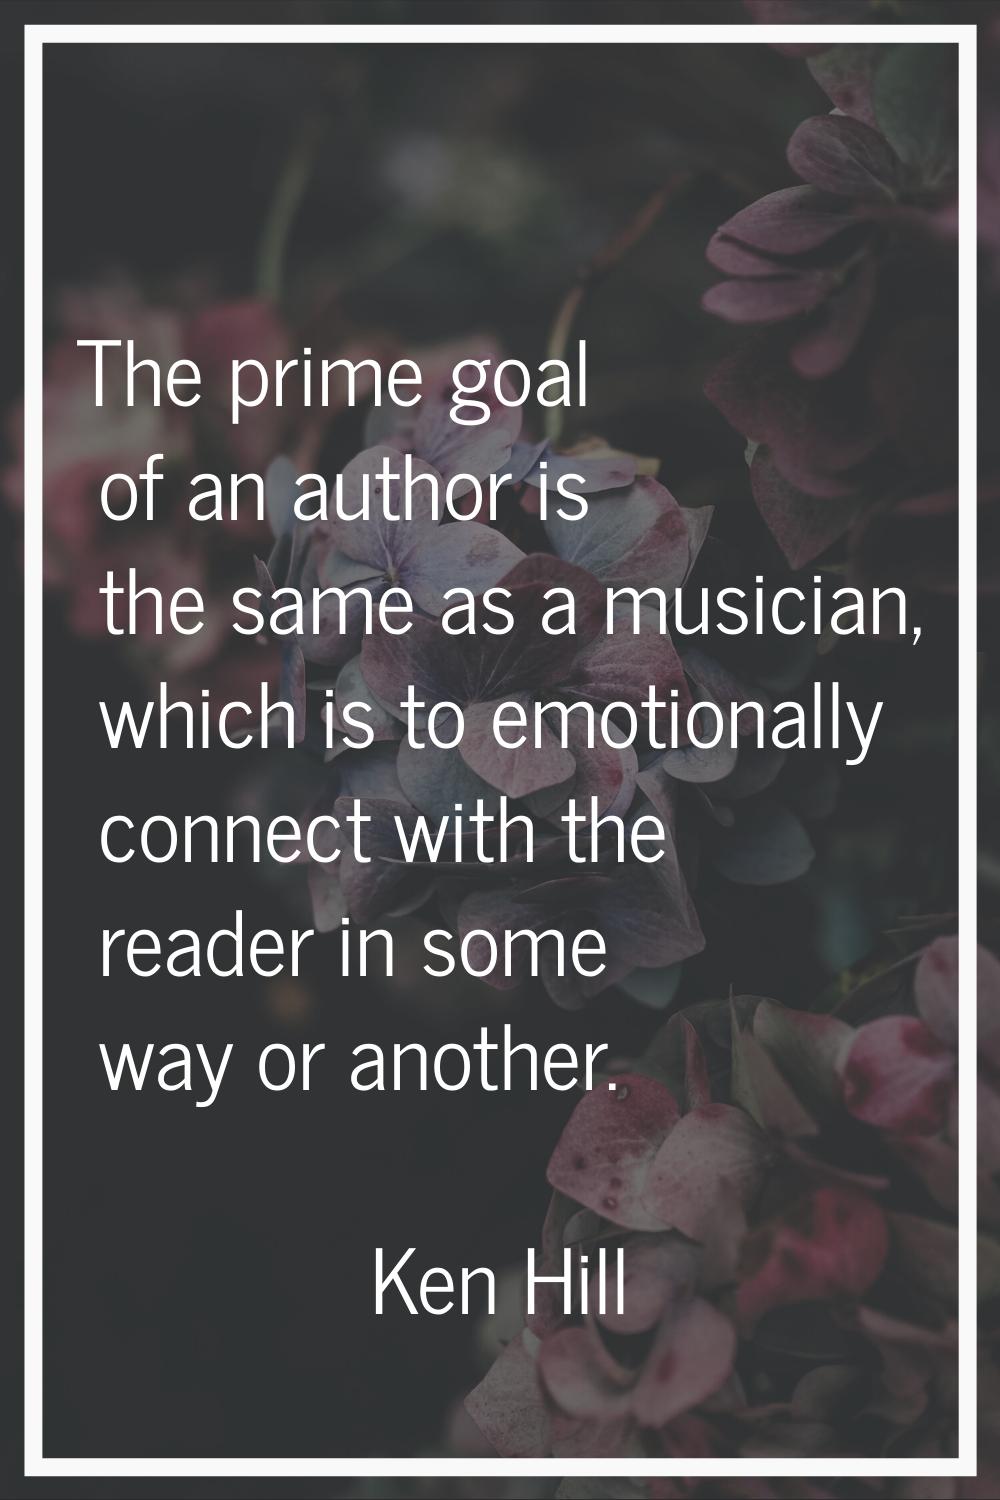 The prime goal of an author is the same as a musician, which is to emotionally connect with the rea